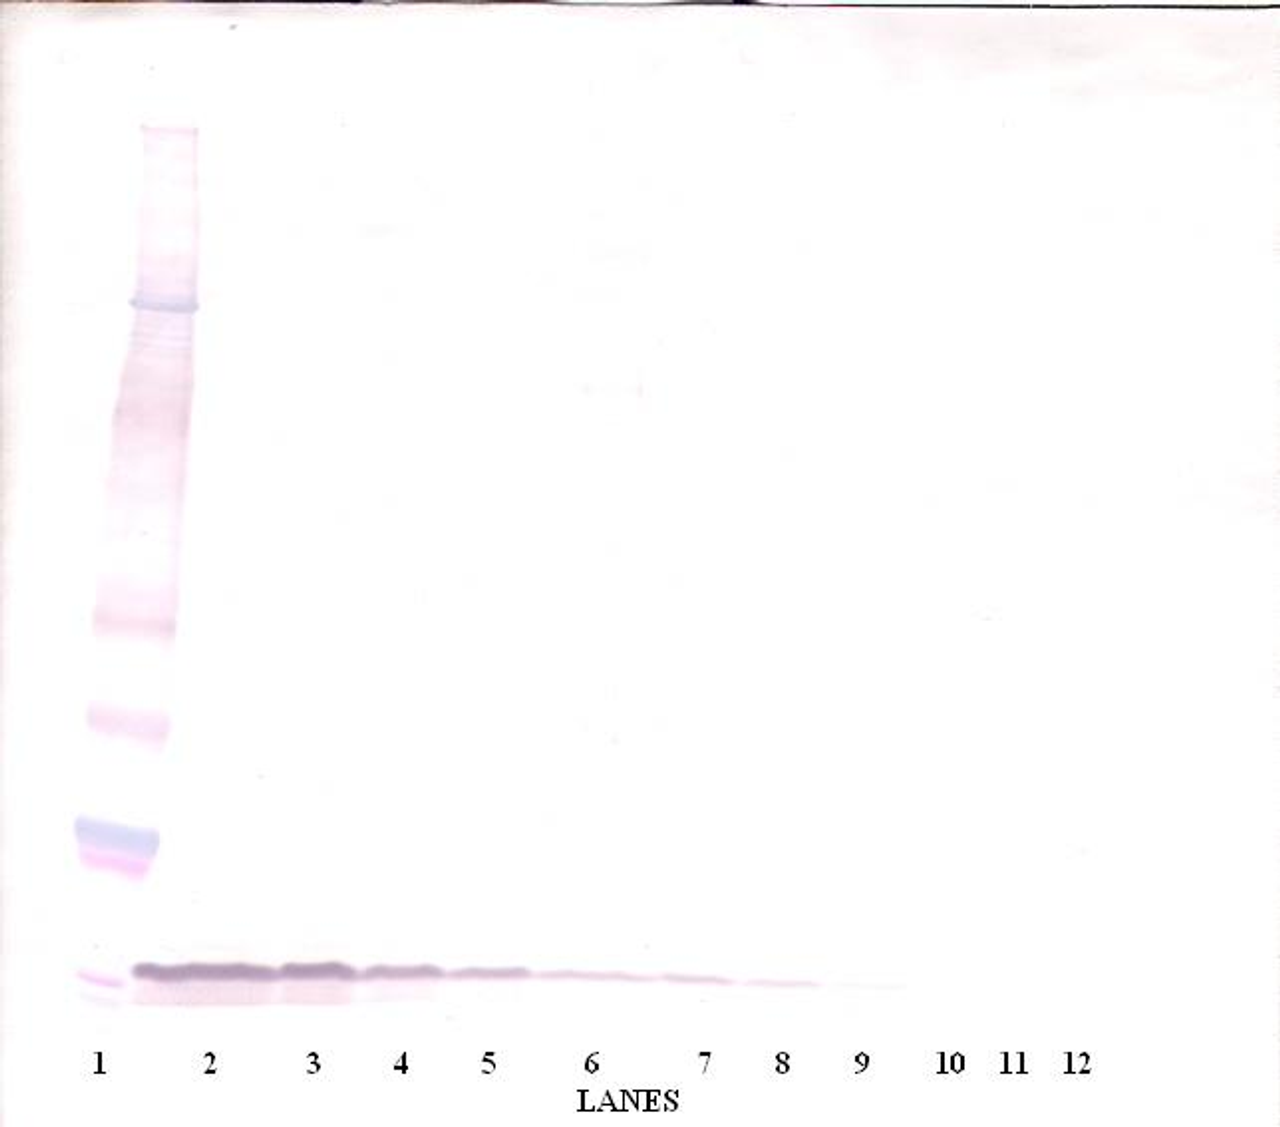 To detect mEGF by Western Blot analysis this antibody can be used at a concentration of 0.1- 0.2 ug/ml. Used in conjunction with compatible secondary reagents the detection limit for recombinant mEGF is 1.5-3.0 ng/lane, under either reducing or non-reducing conditions.